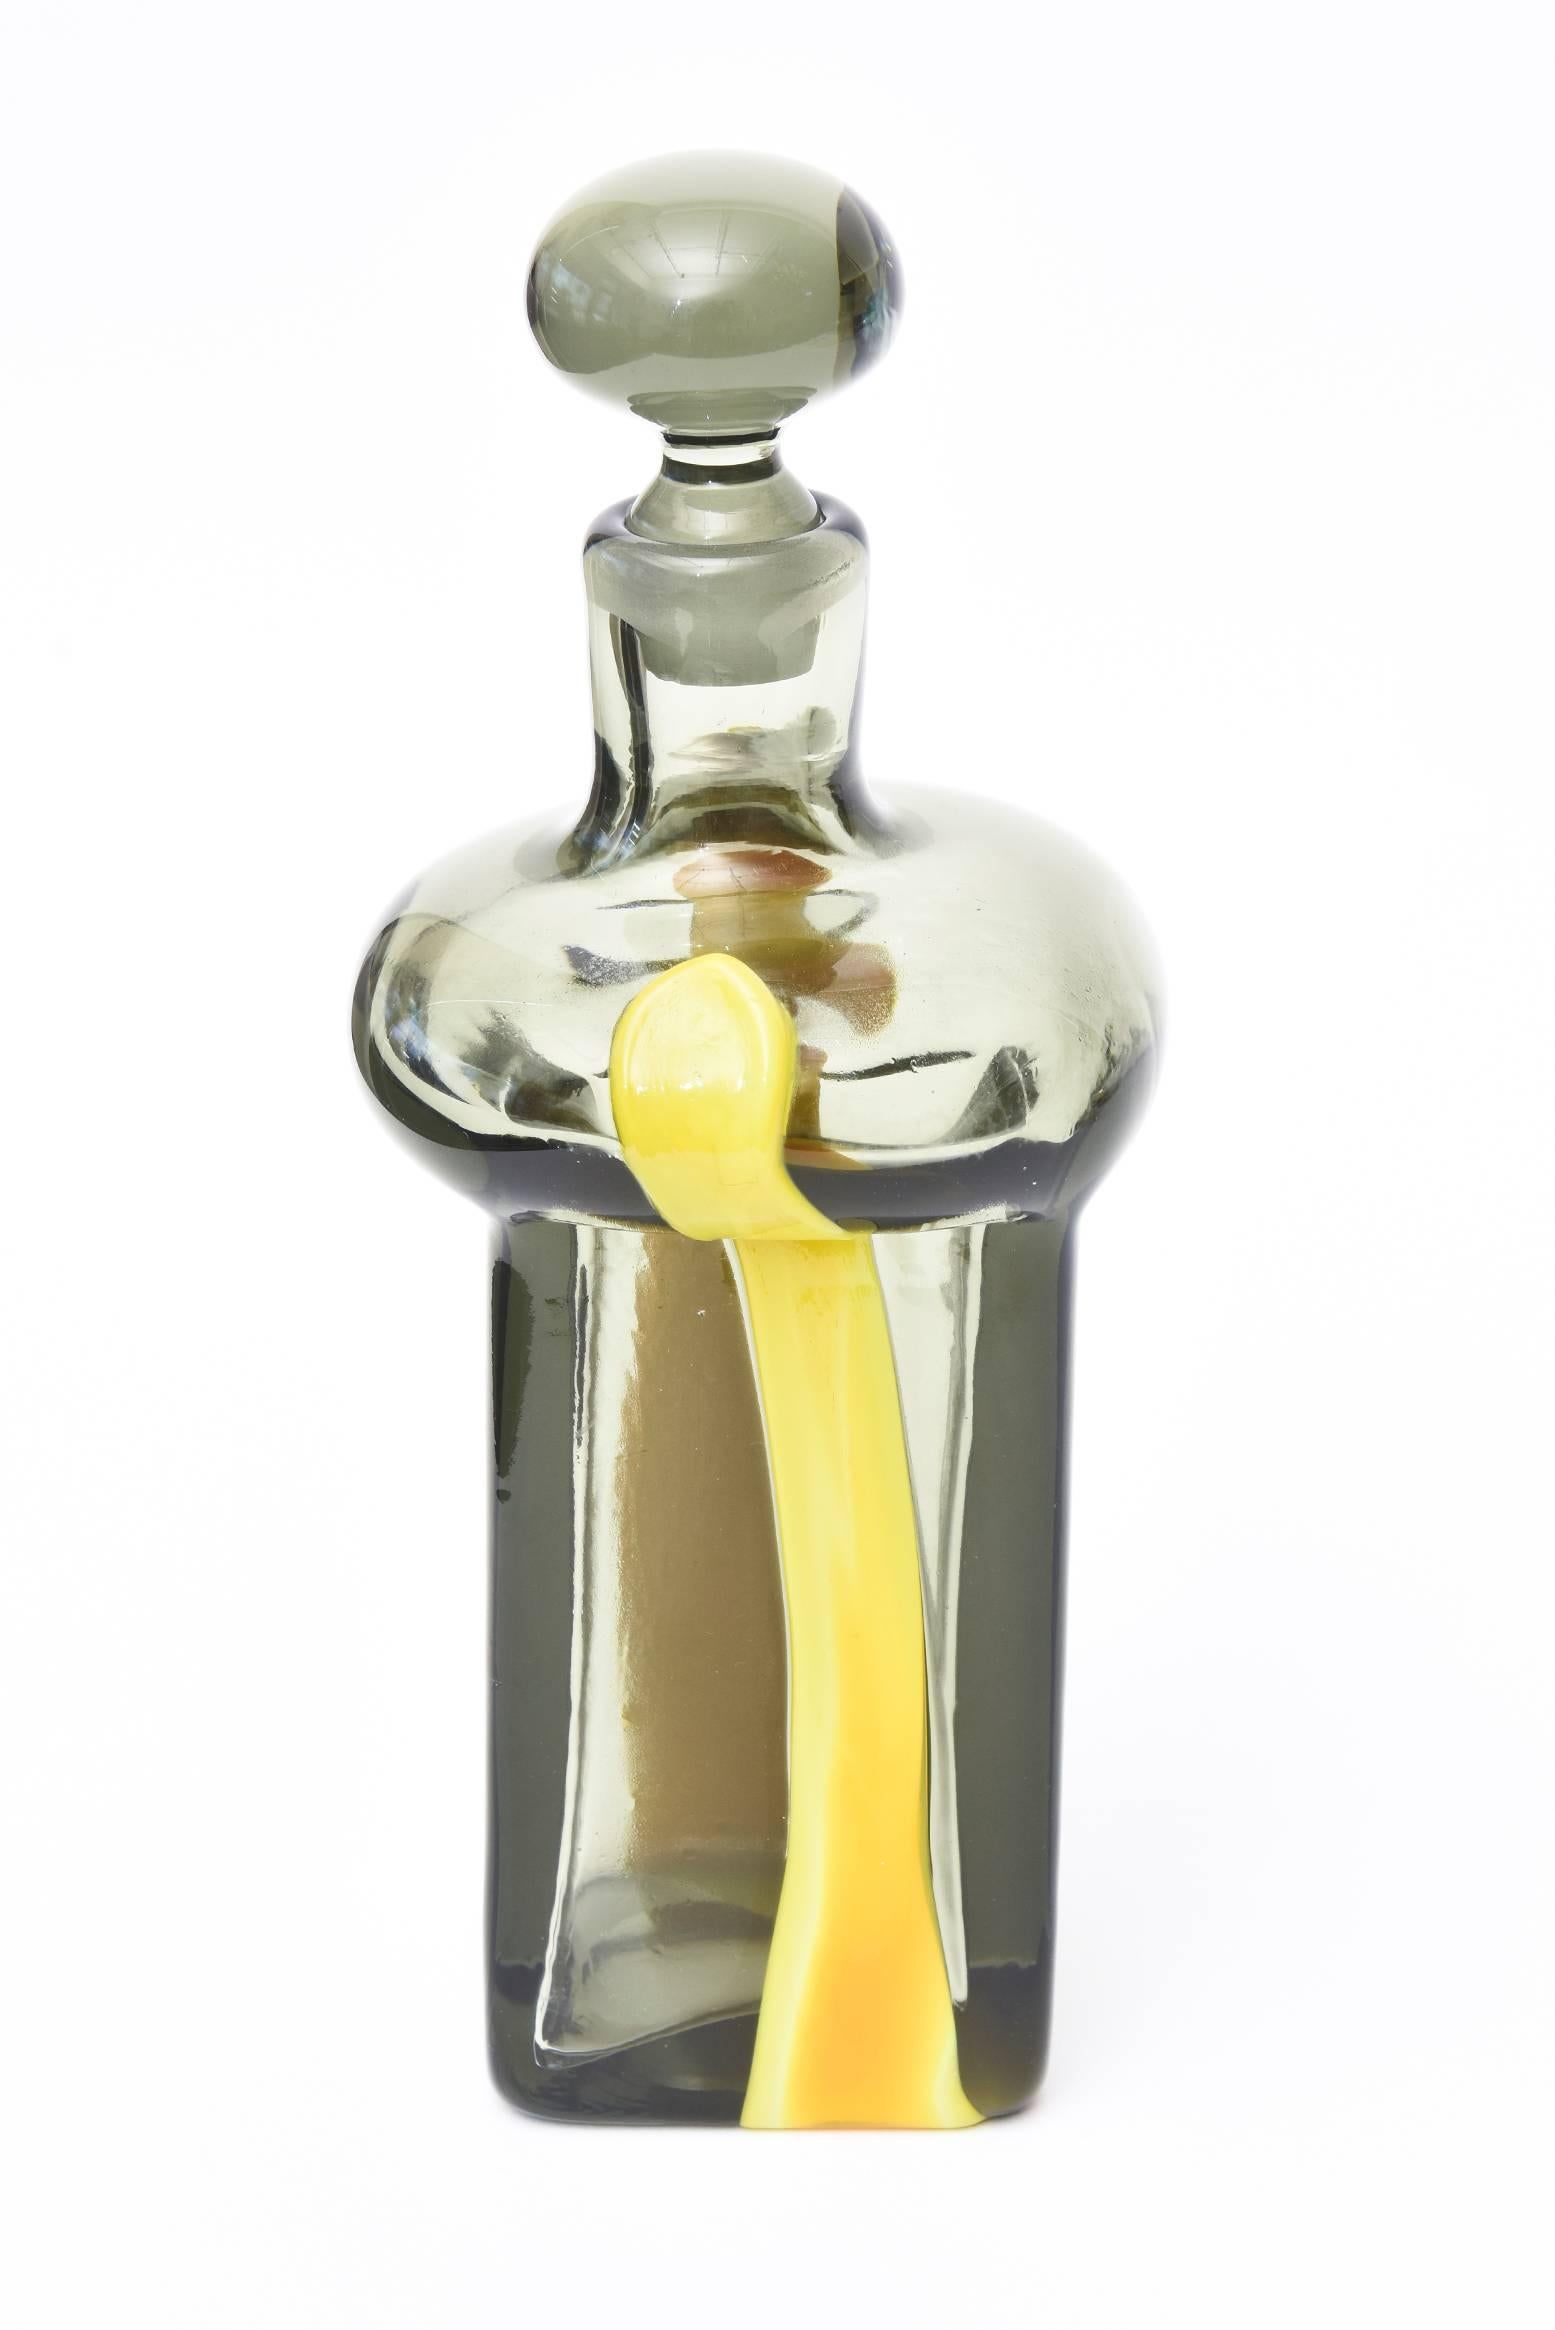 This tres chic Italian Murano sculptural decanter was designed by Pierre Cardin for Venini. The grey smoked glass is accented on the sides by blobs of thick linear yellow applied blown glass. It is a sculptural decanter bottle and a great barware